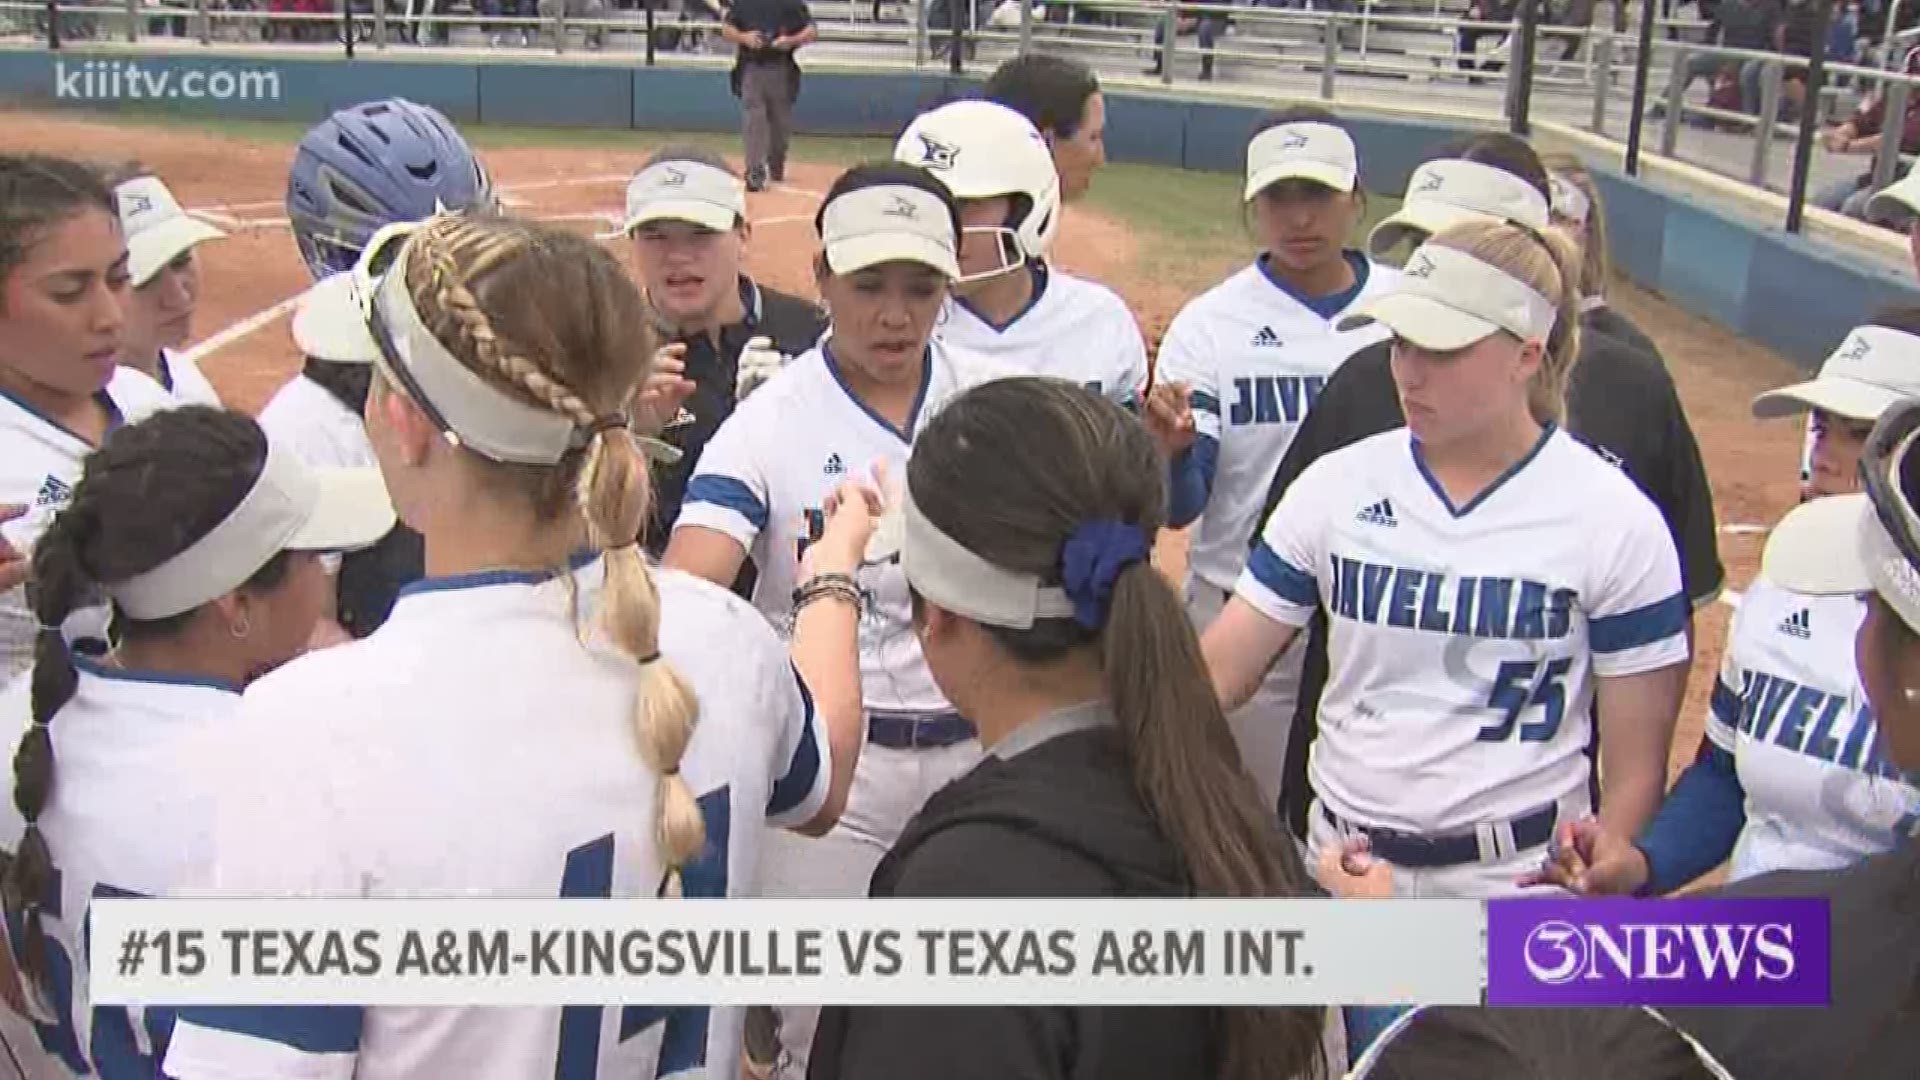 Texas A&M-Kingsville softball split it's home opener double-header with Texas A&M-International.